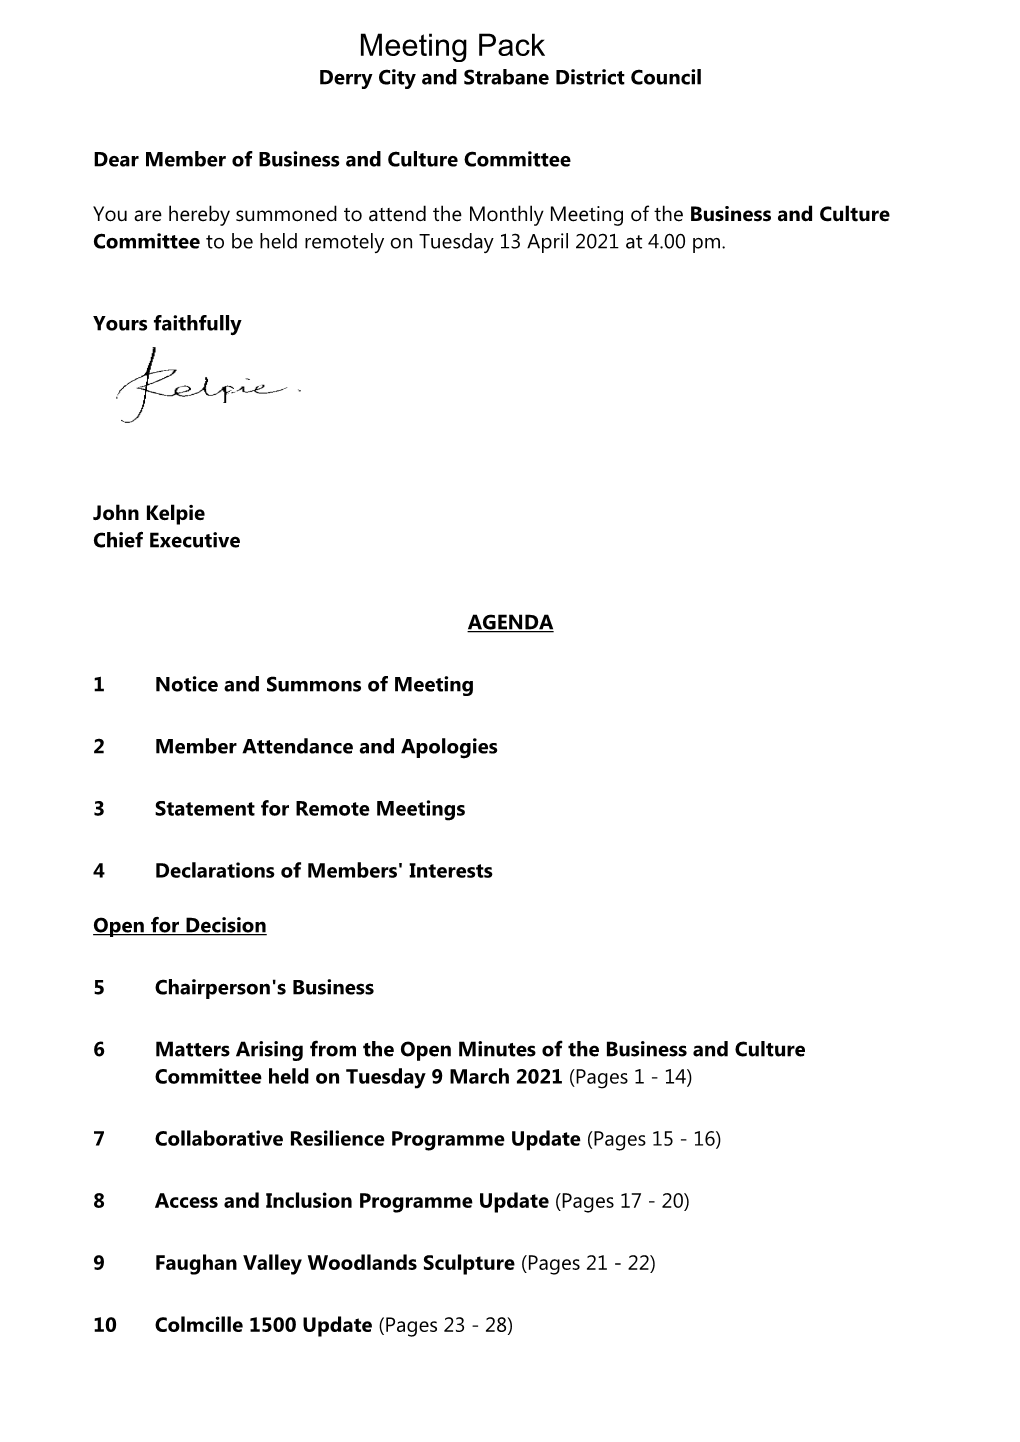 (Public Pack)Agenda Document for Business and Culture Committee